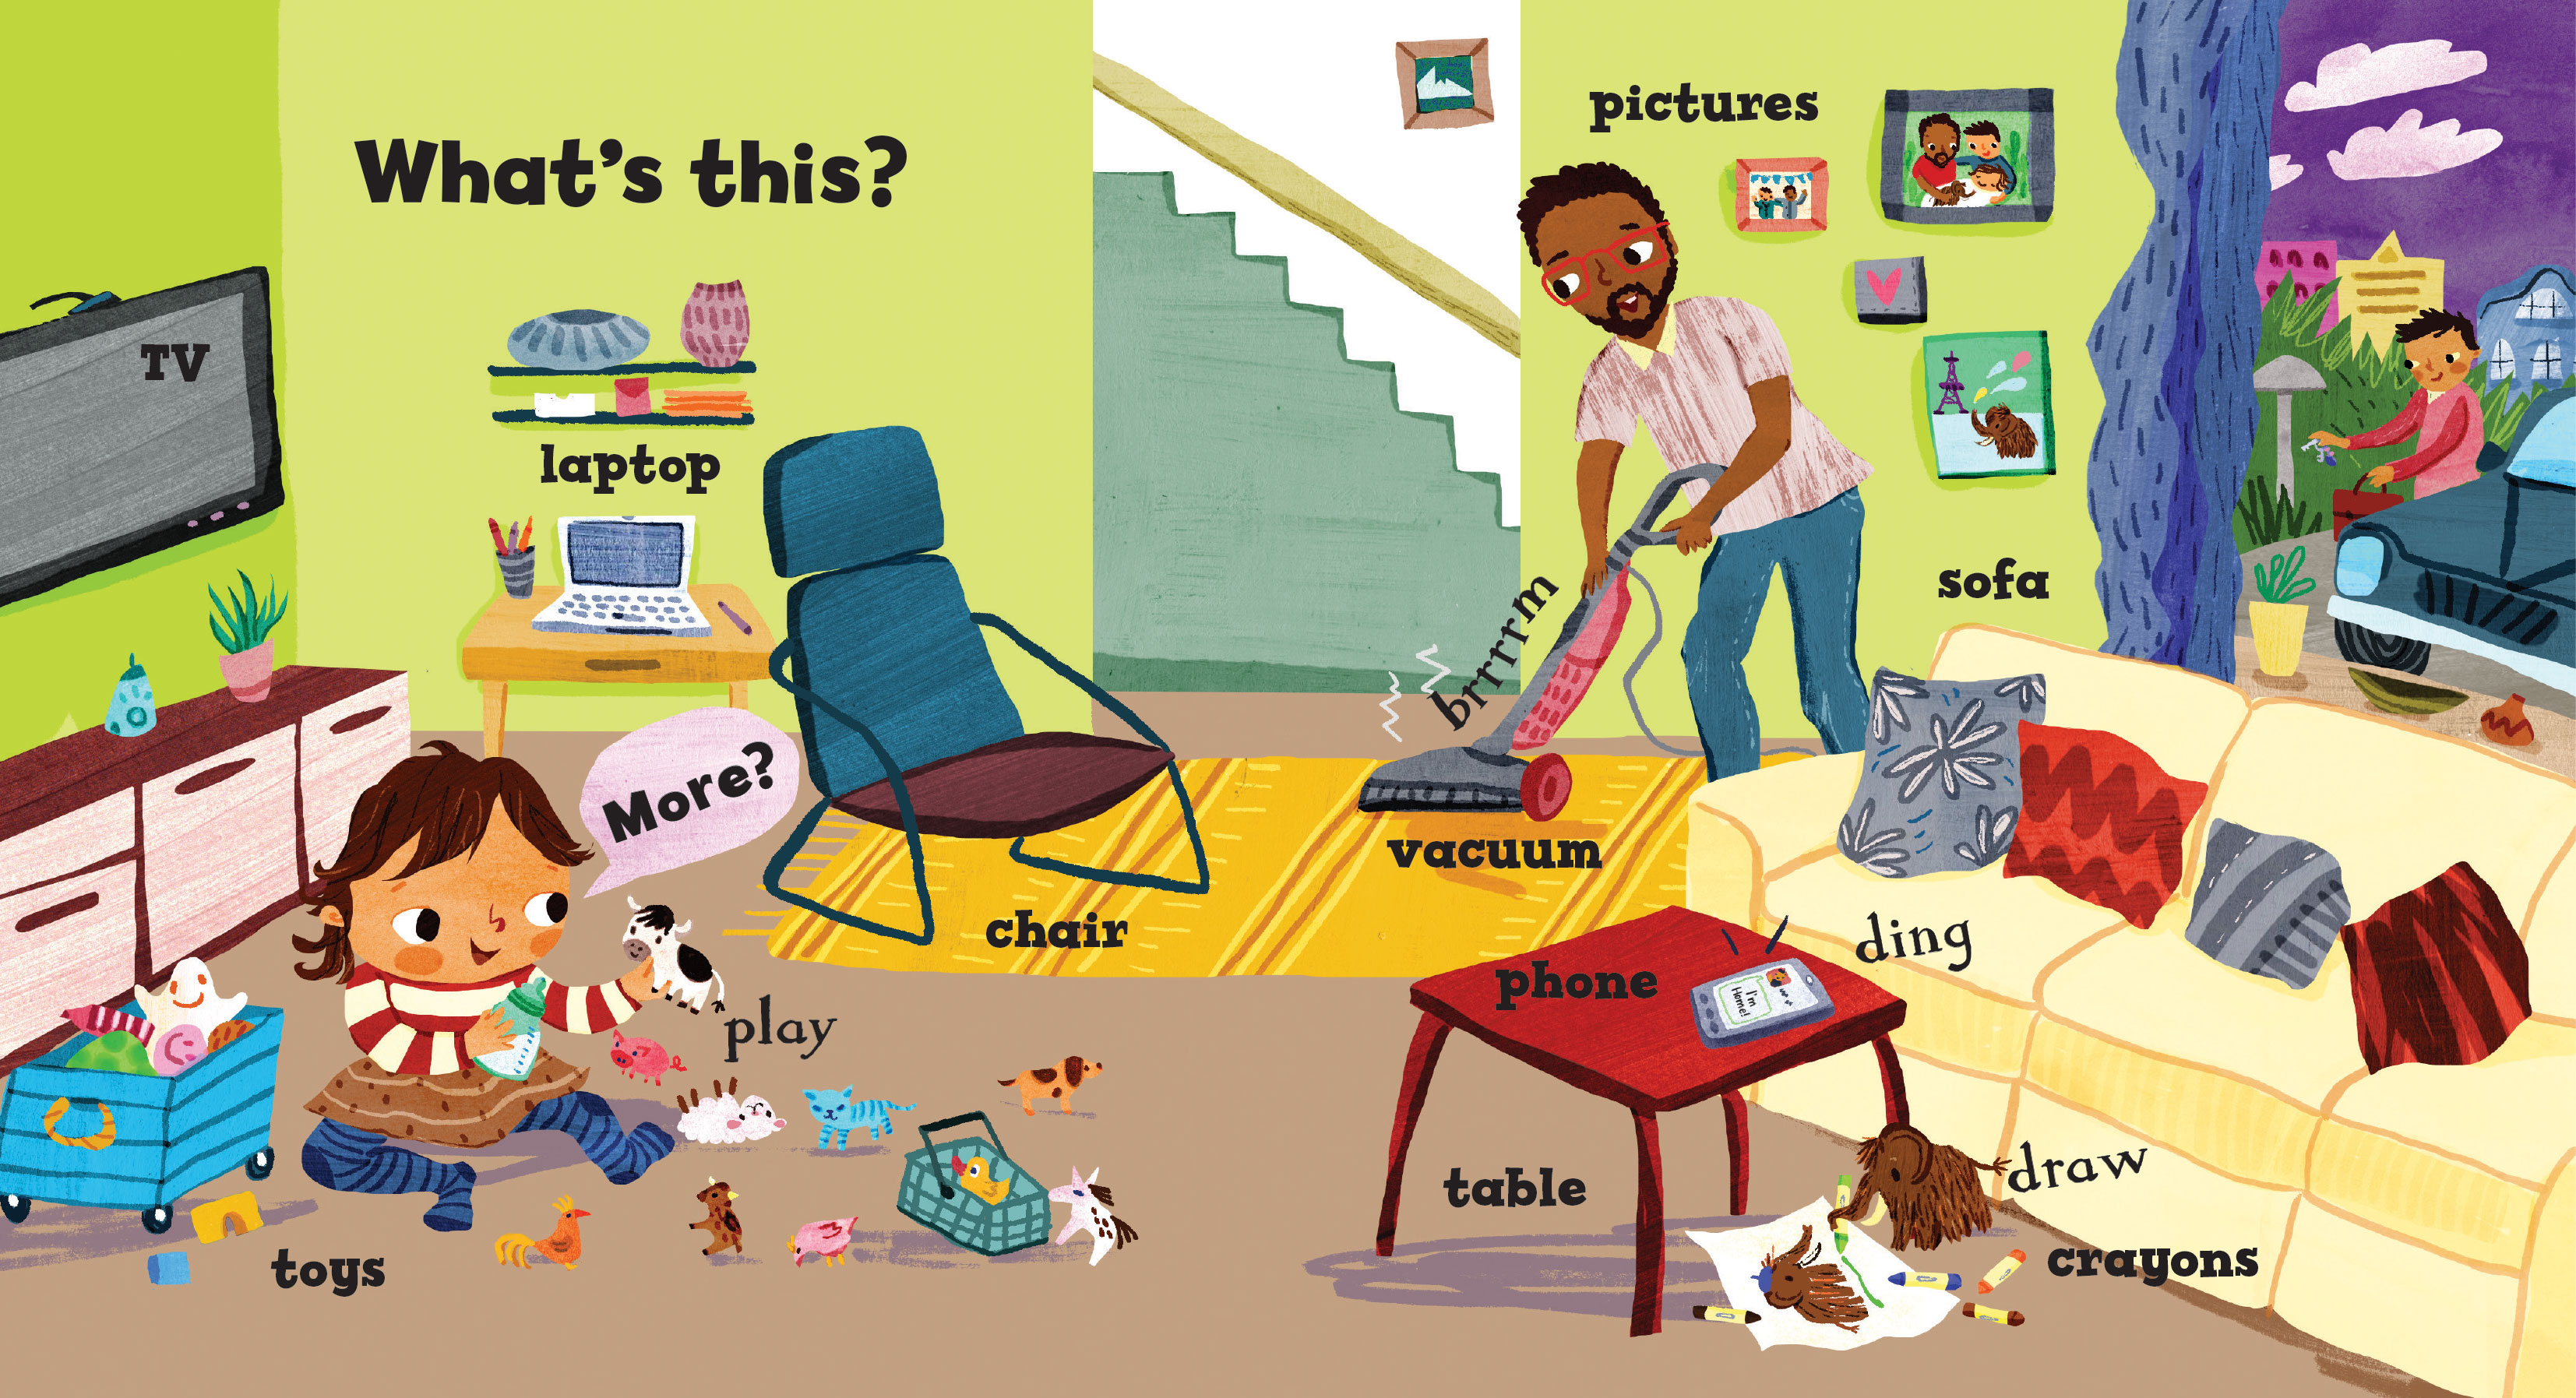 A panel from the book Baby's First words, in which a father cleans his living room while answering his daughter's questions. 